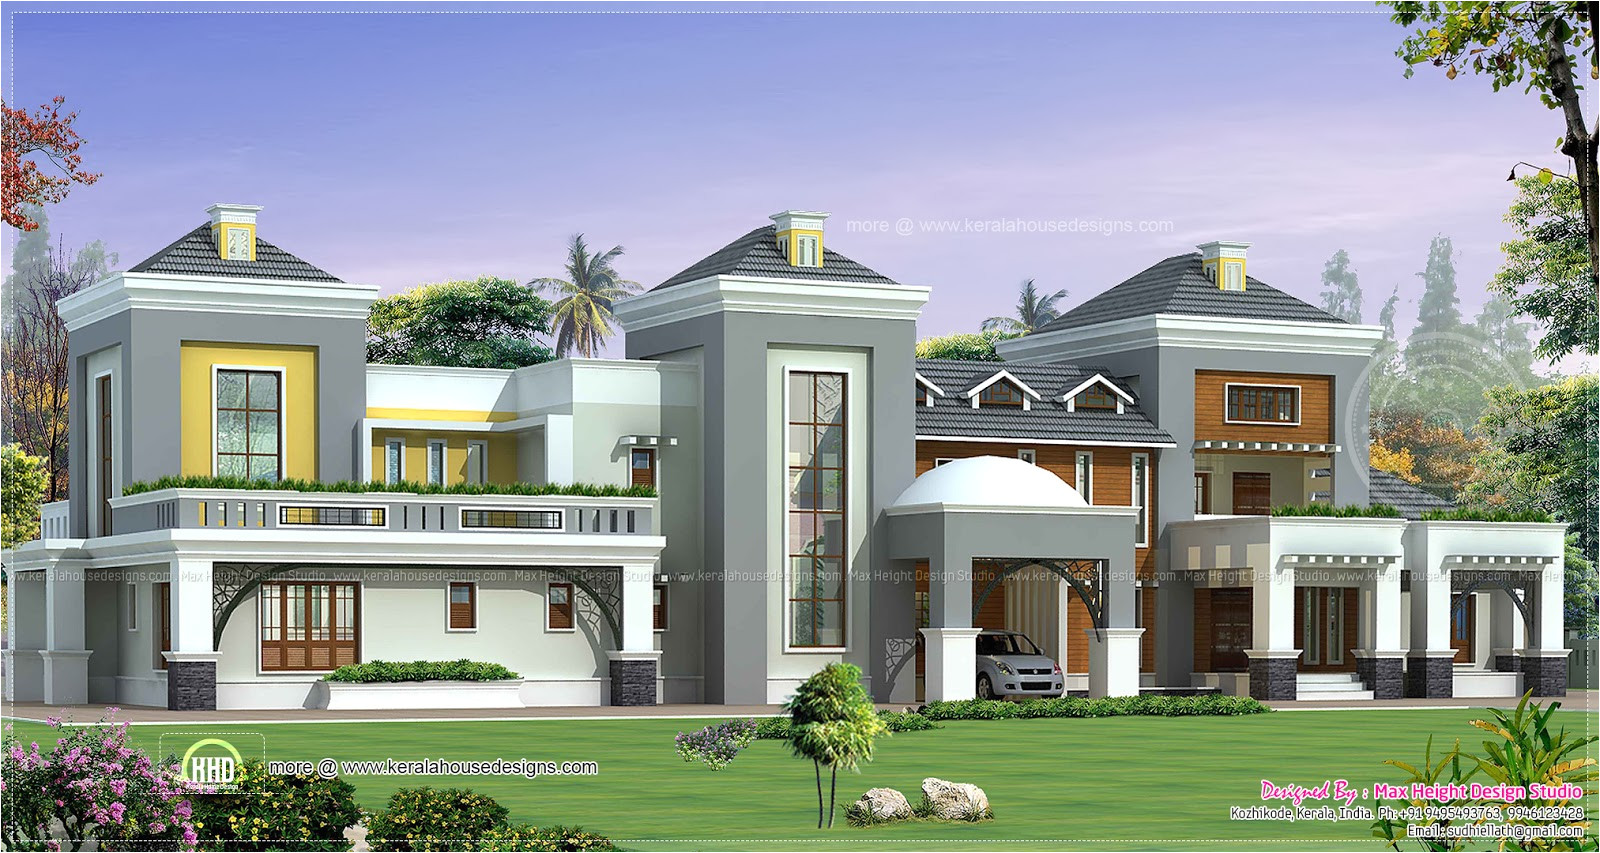 Luxury Home Plans Luxury House Plan with Photo Kerala Home Design and